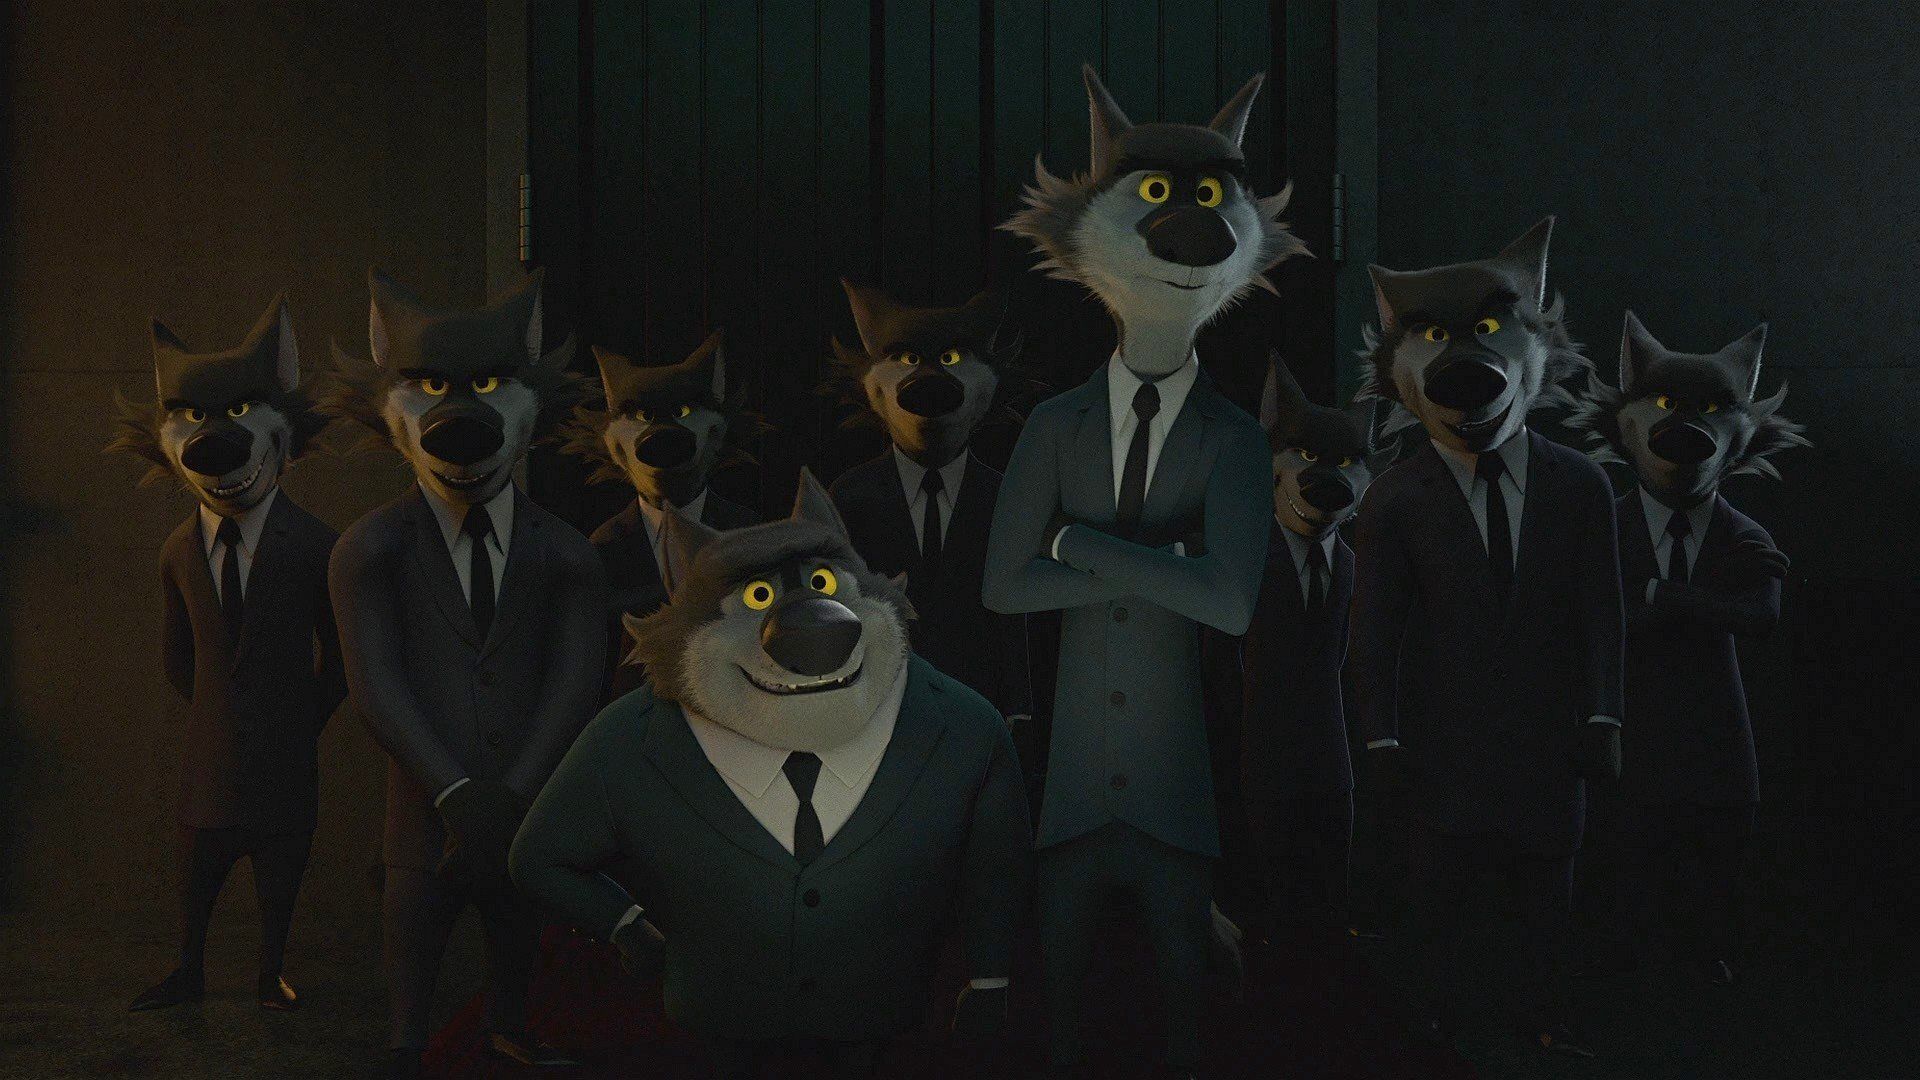 Anthro, Gangsters, Gangster, Rock Dog, Animals, Wolf, 3D, Cartoon, Movies, Suits, Clothing, Tie, Screen shot, Screengrab Wallpaper HD / Desktop and Mobile Background